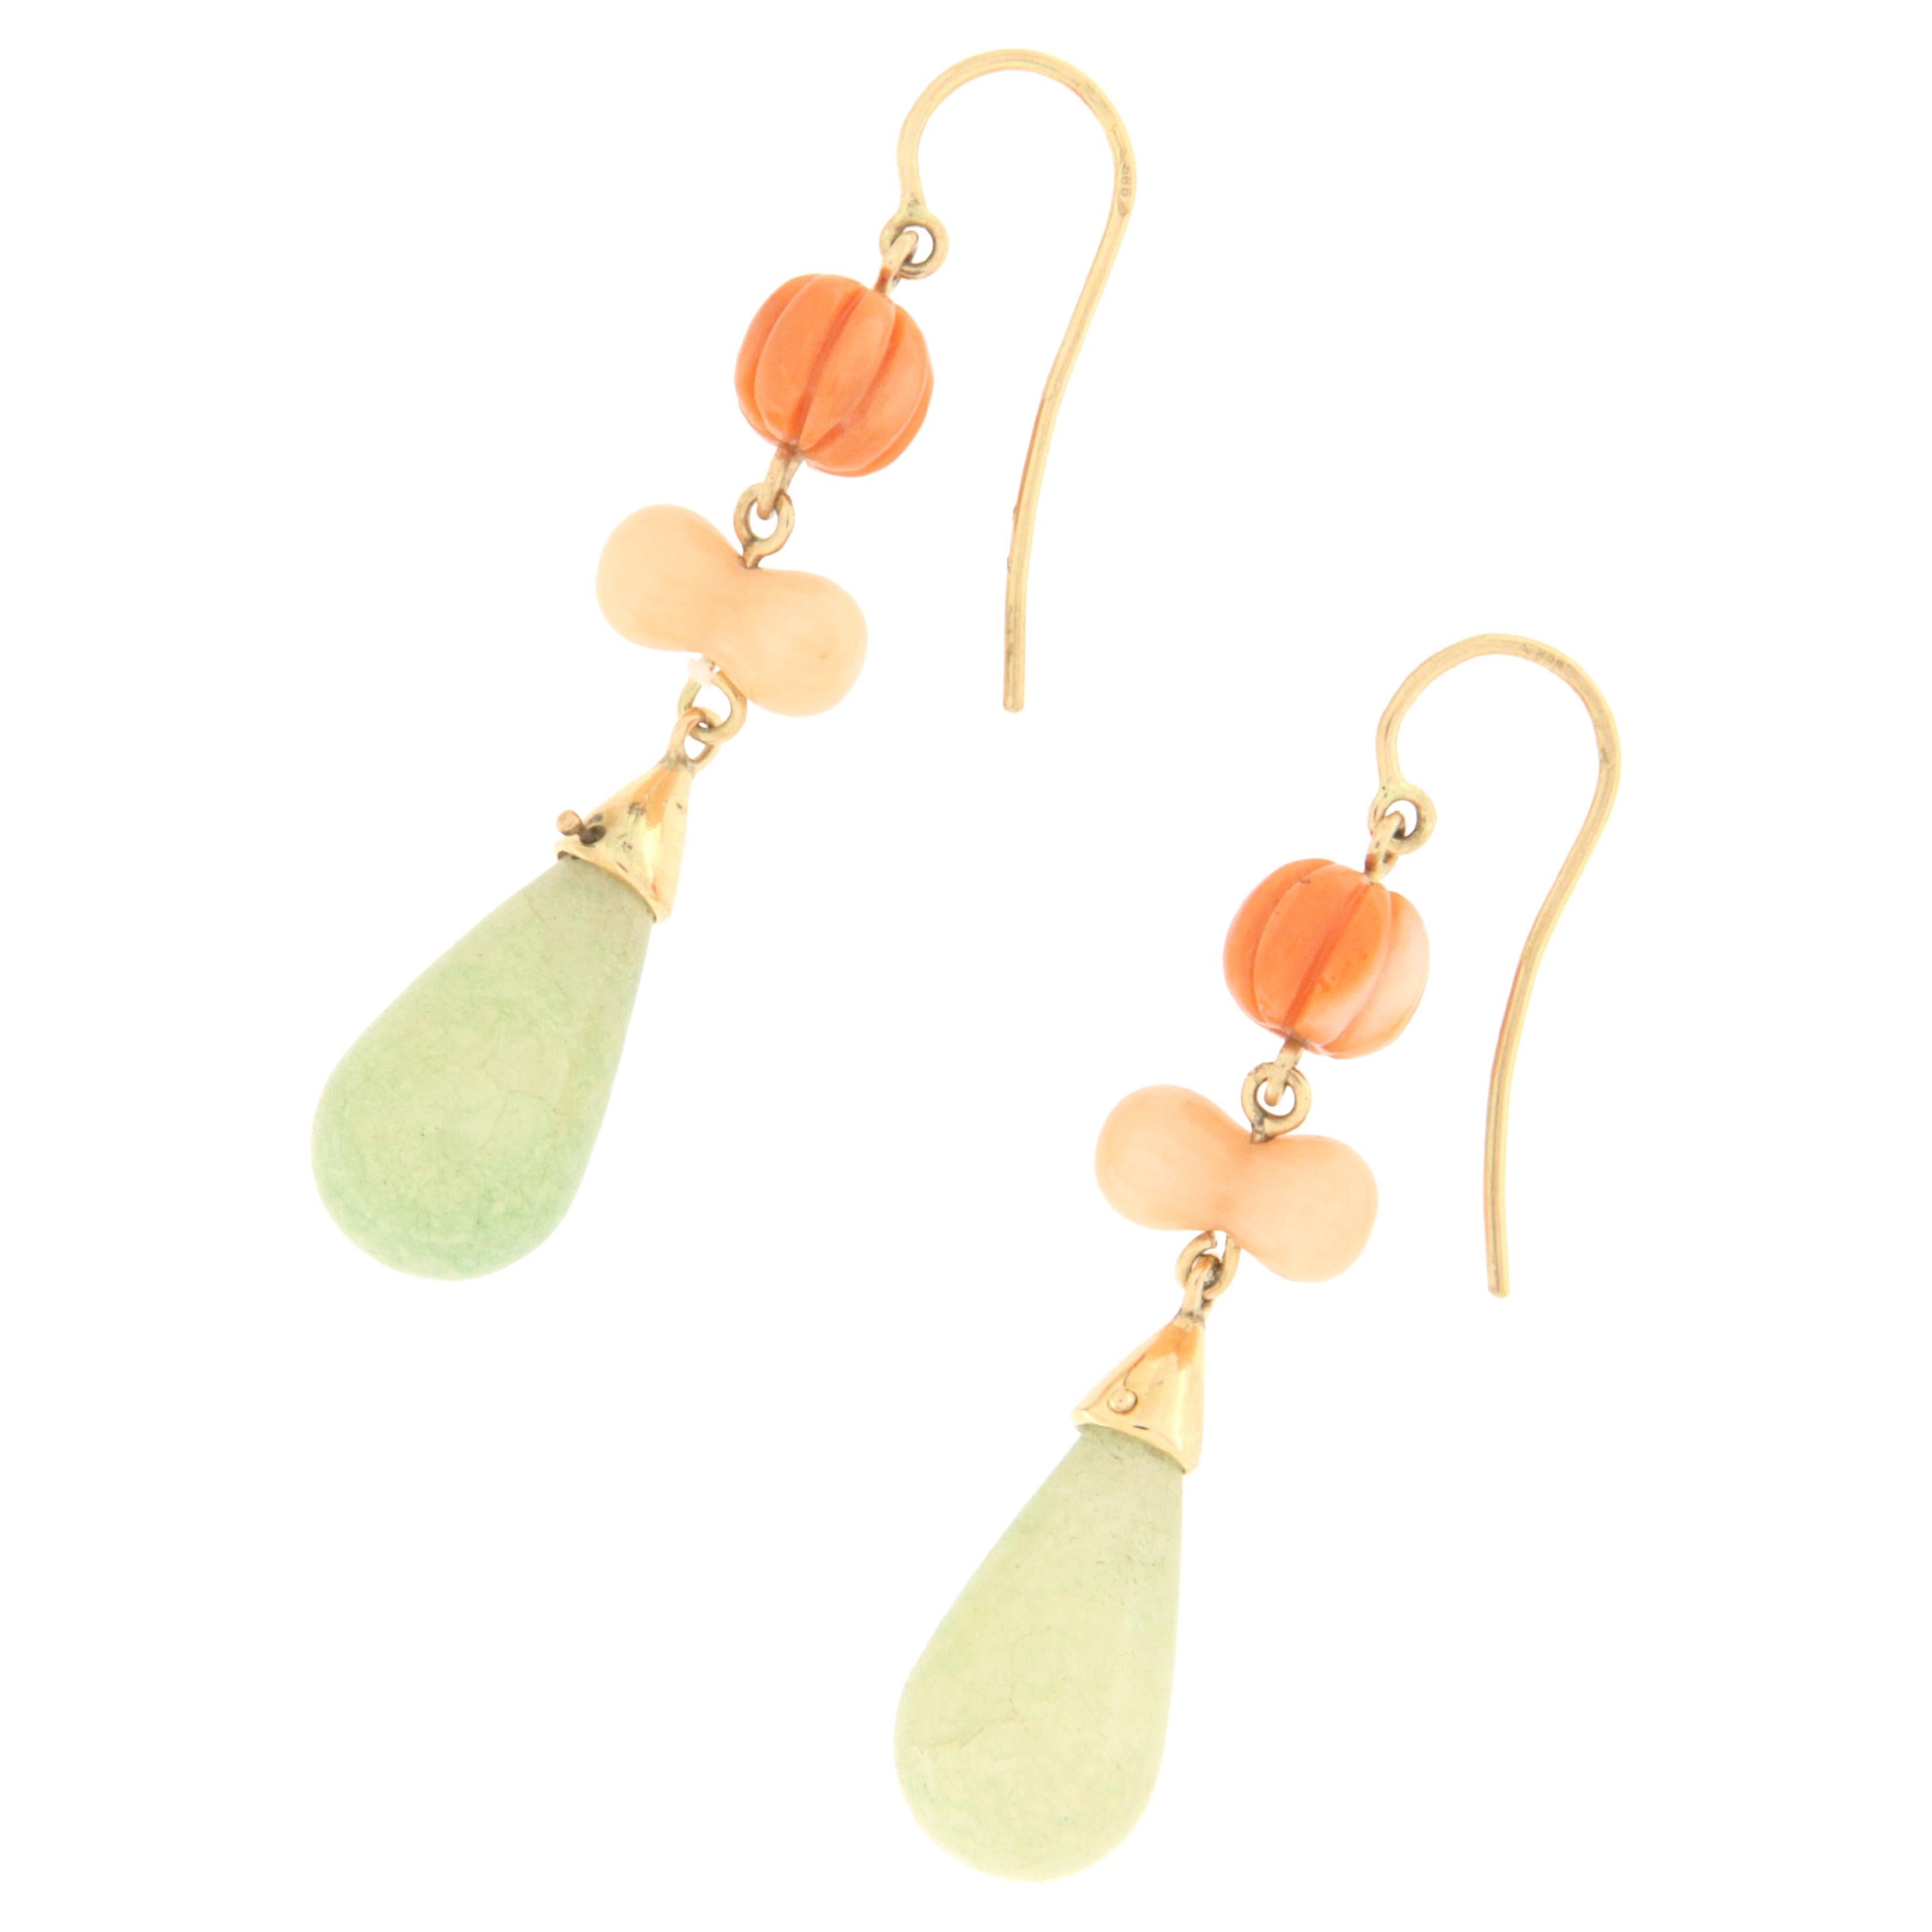 14 karat yellow gold drop earrings. Handmade by artisans made with coral and drop jade

Earrings total weight 8.70 grams
